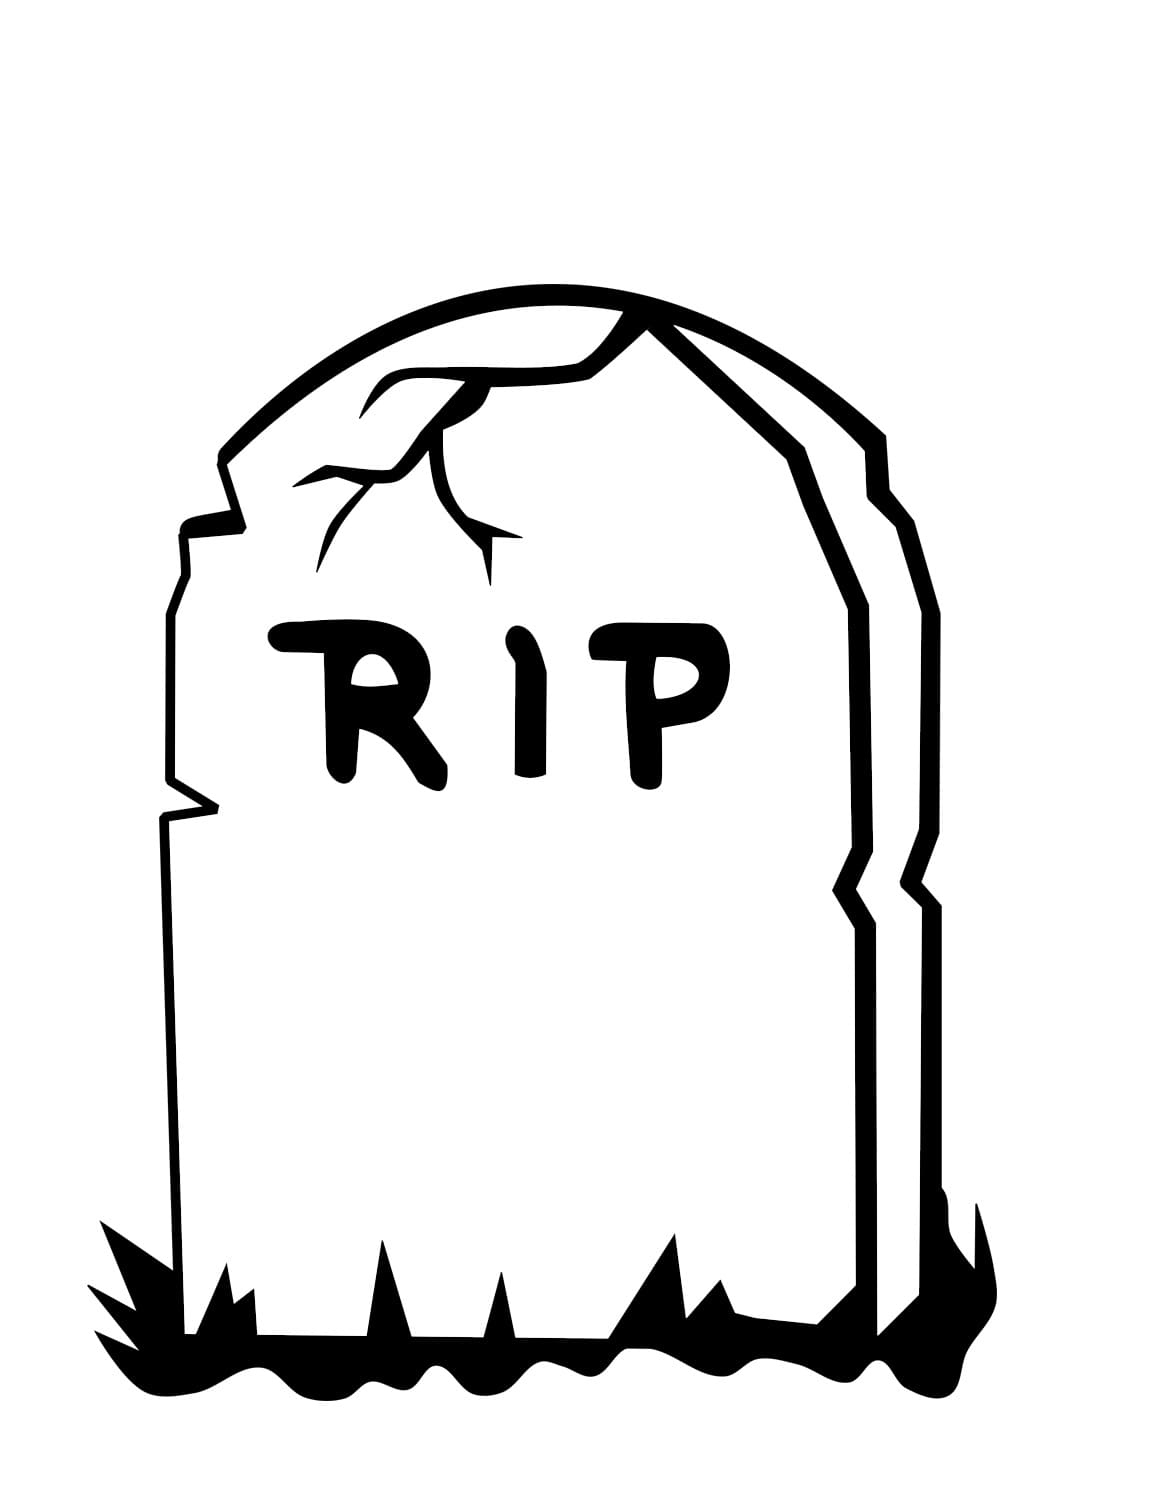 Normal Tombstone coloring page - Download, Print or Color Online for Free